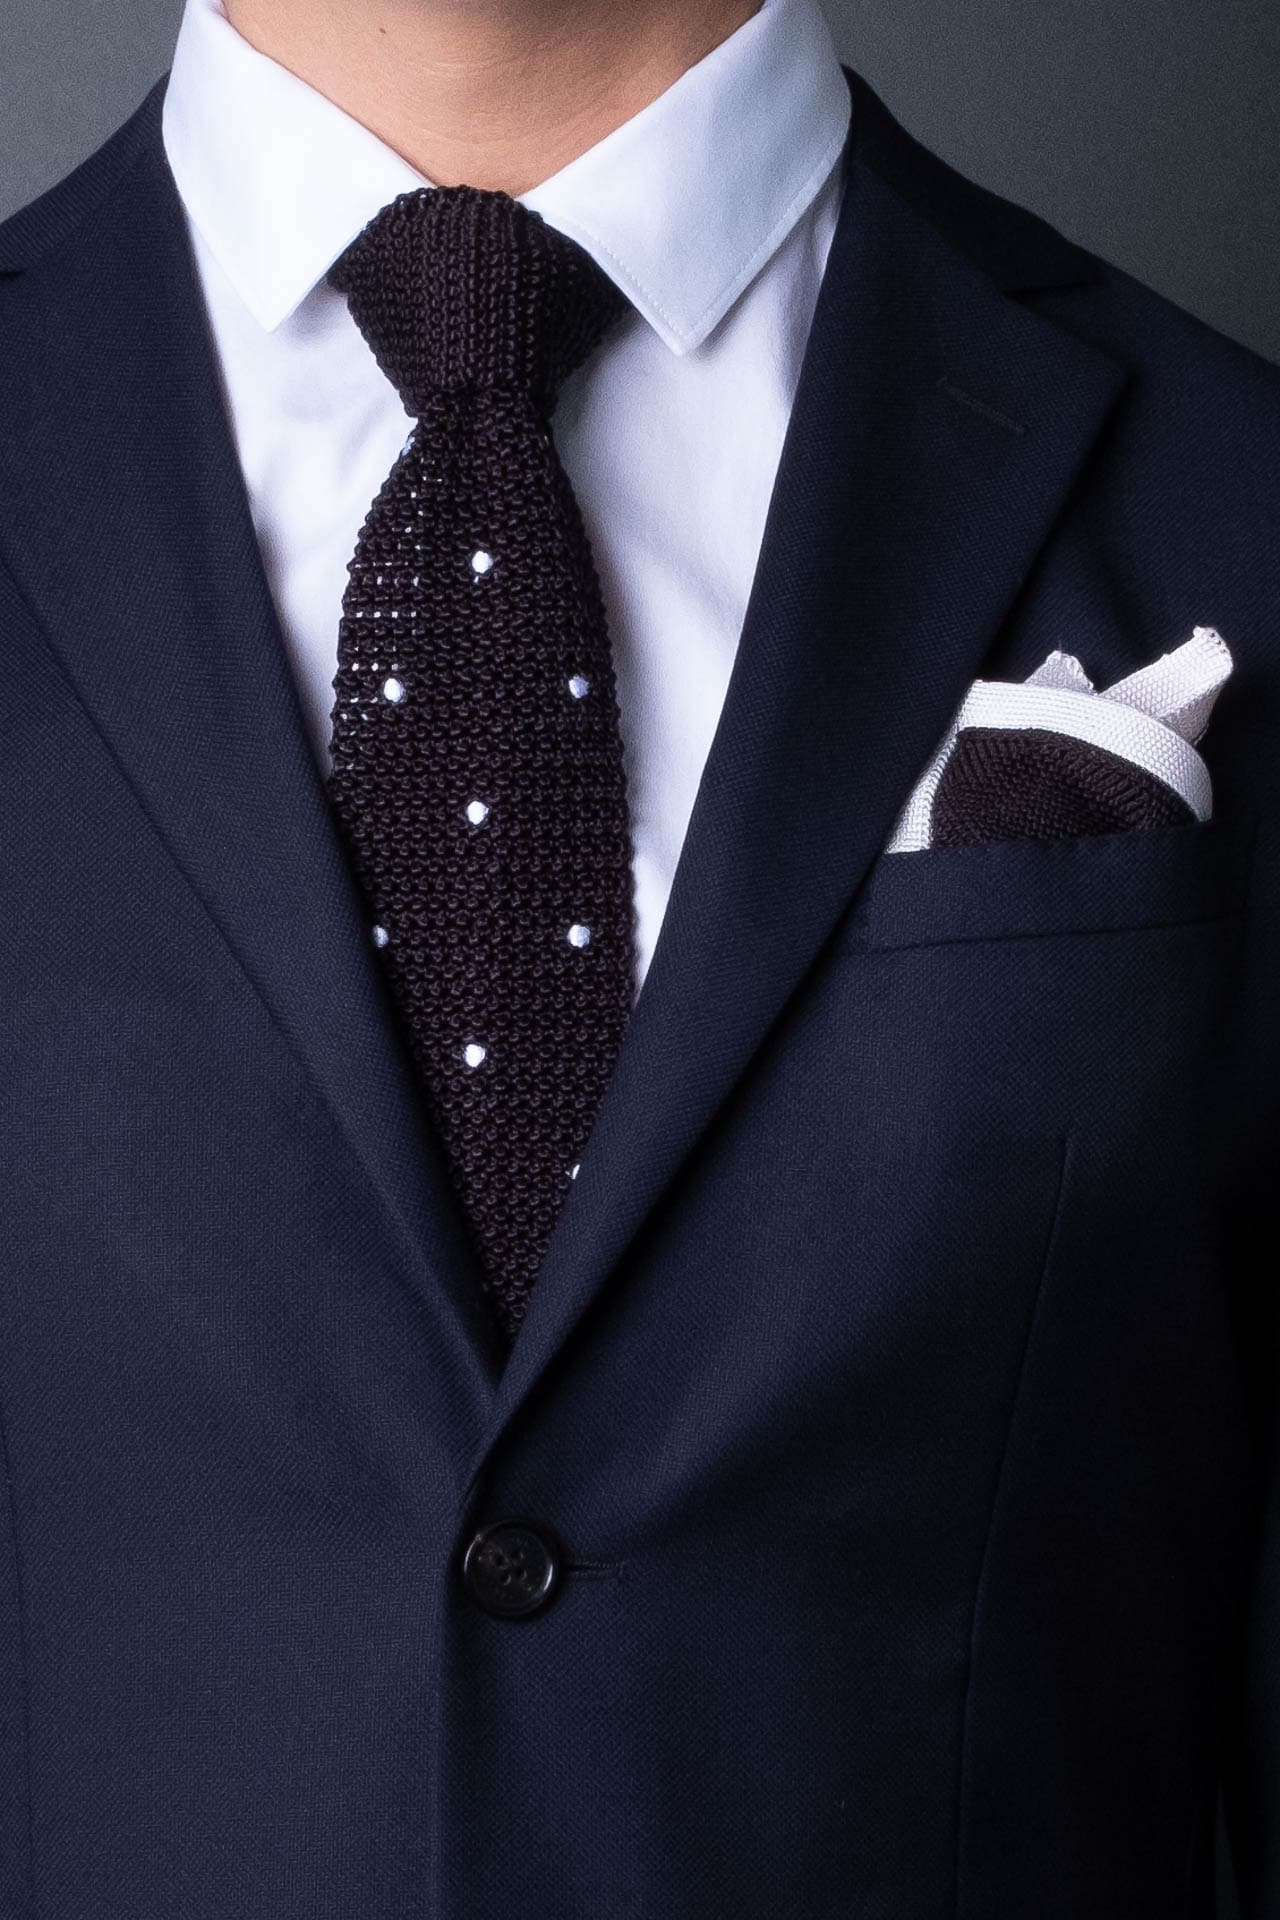 silk-knitted-tie-with-square-tip-black-with-polka-dots-made-in-italy-combo-matching-pocket-square